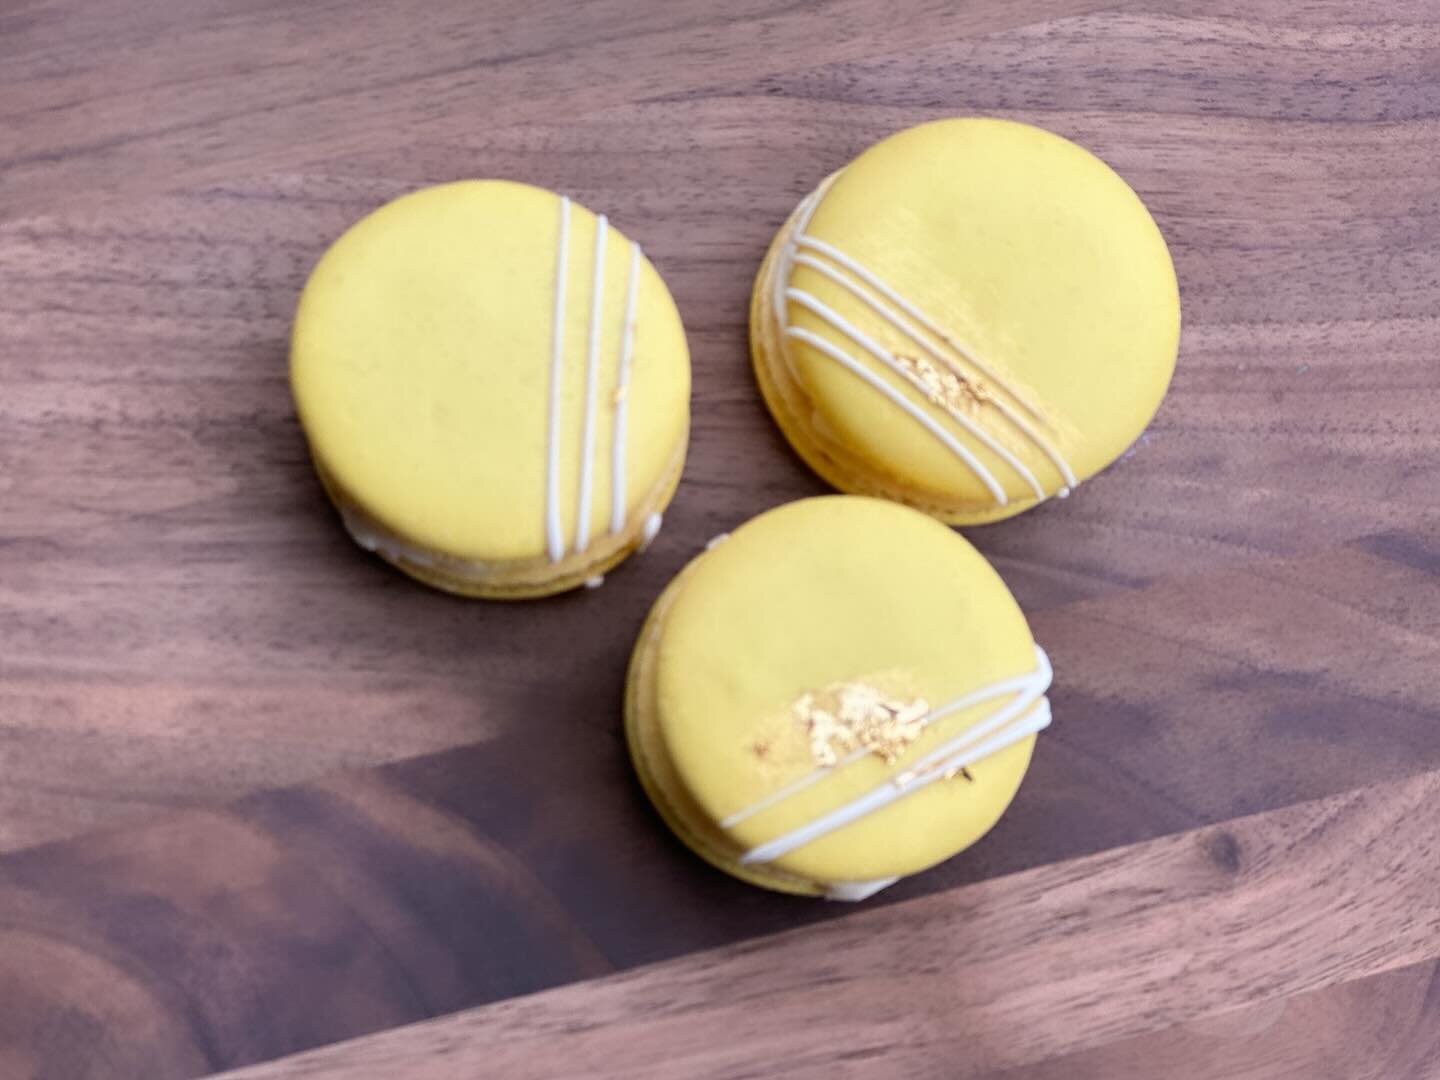 Flash sale of extras!!! Message me to claim! As always it&rsquo;s first come first serve.  I have some sneak peeks for spring time with lemon and lemon! 

~ one dozen lemon macarons ((SOLD)) 
~ ((SOLD)) 6&rdquo; vanilla cake with lemon curd and frost